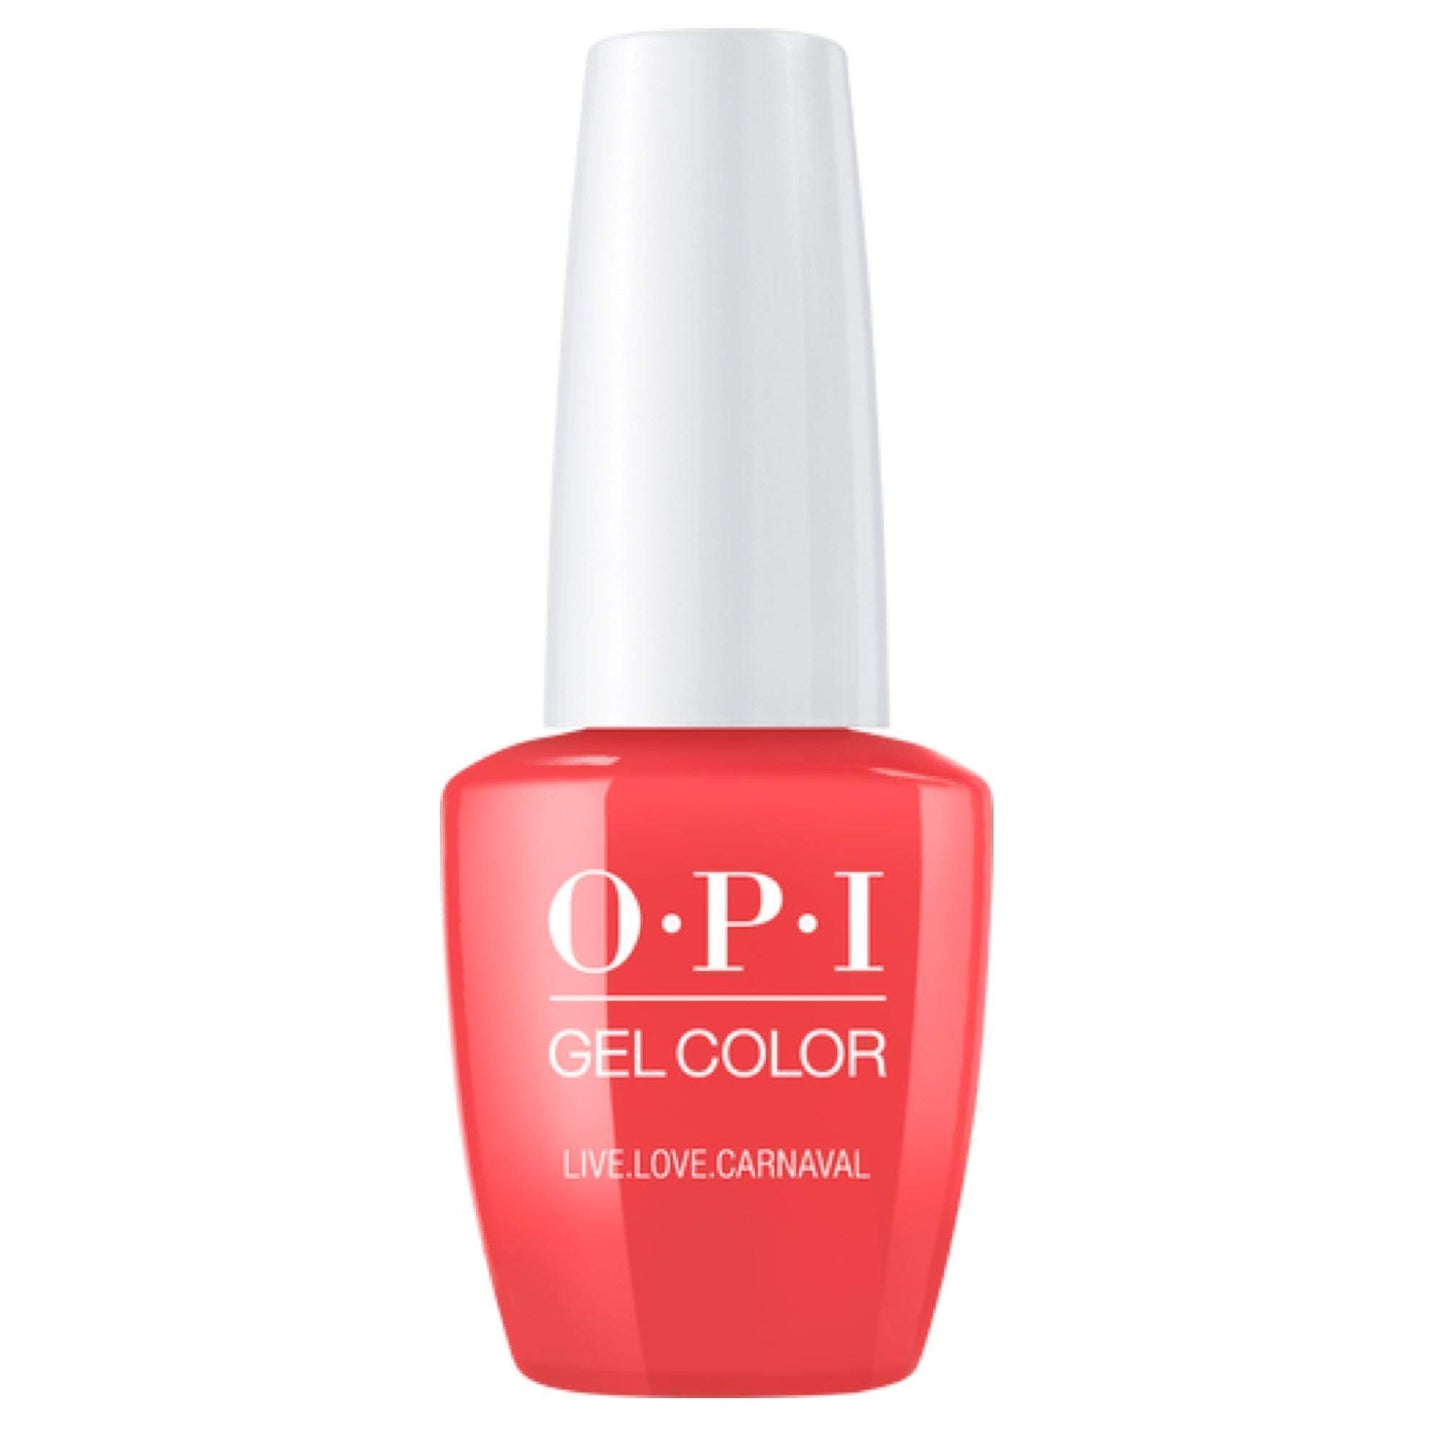 OPI GelColor Live.Love.Carnaval #A69 - Universal Nail Supplies